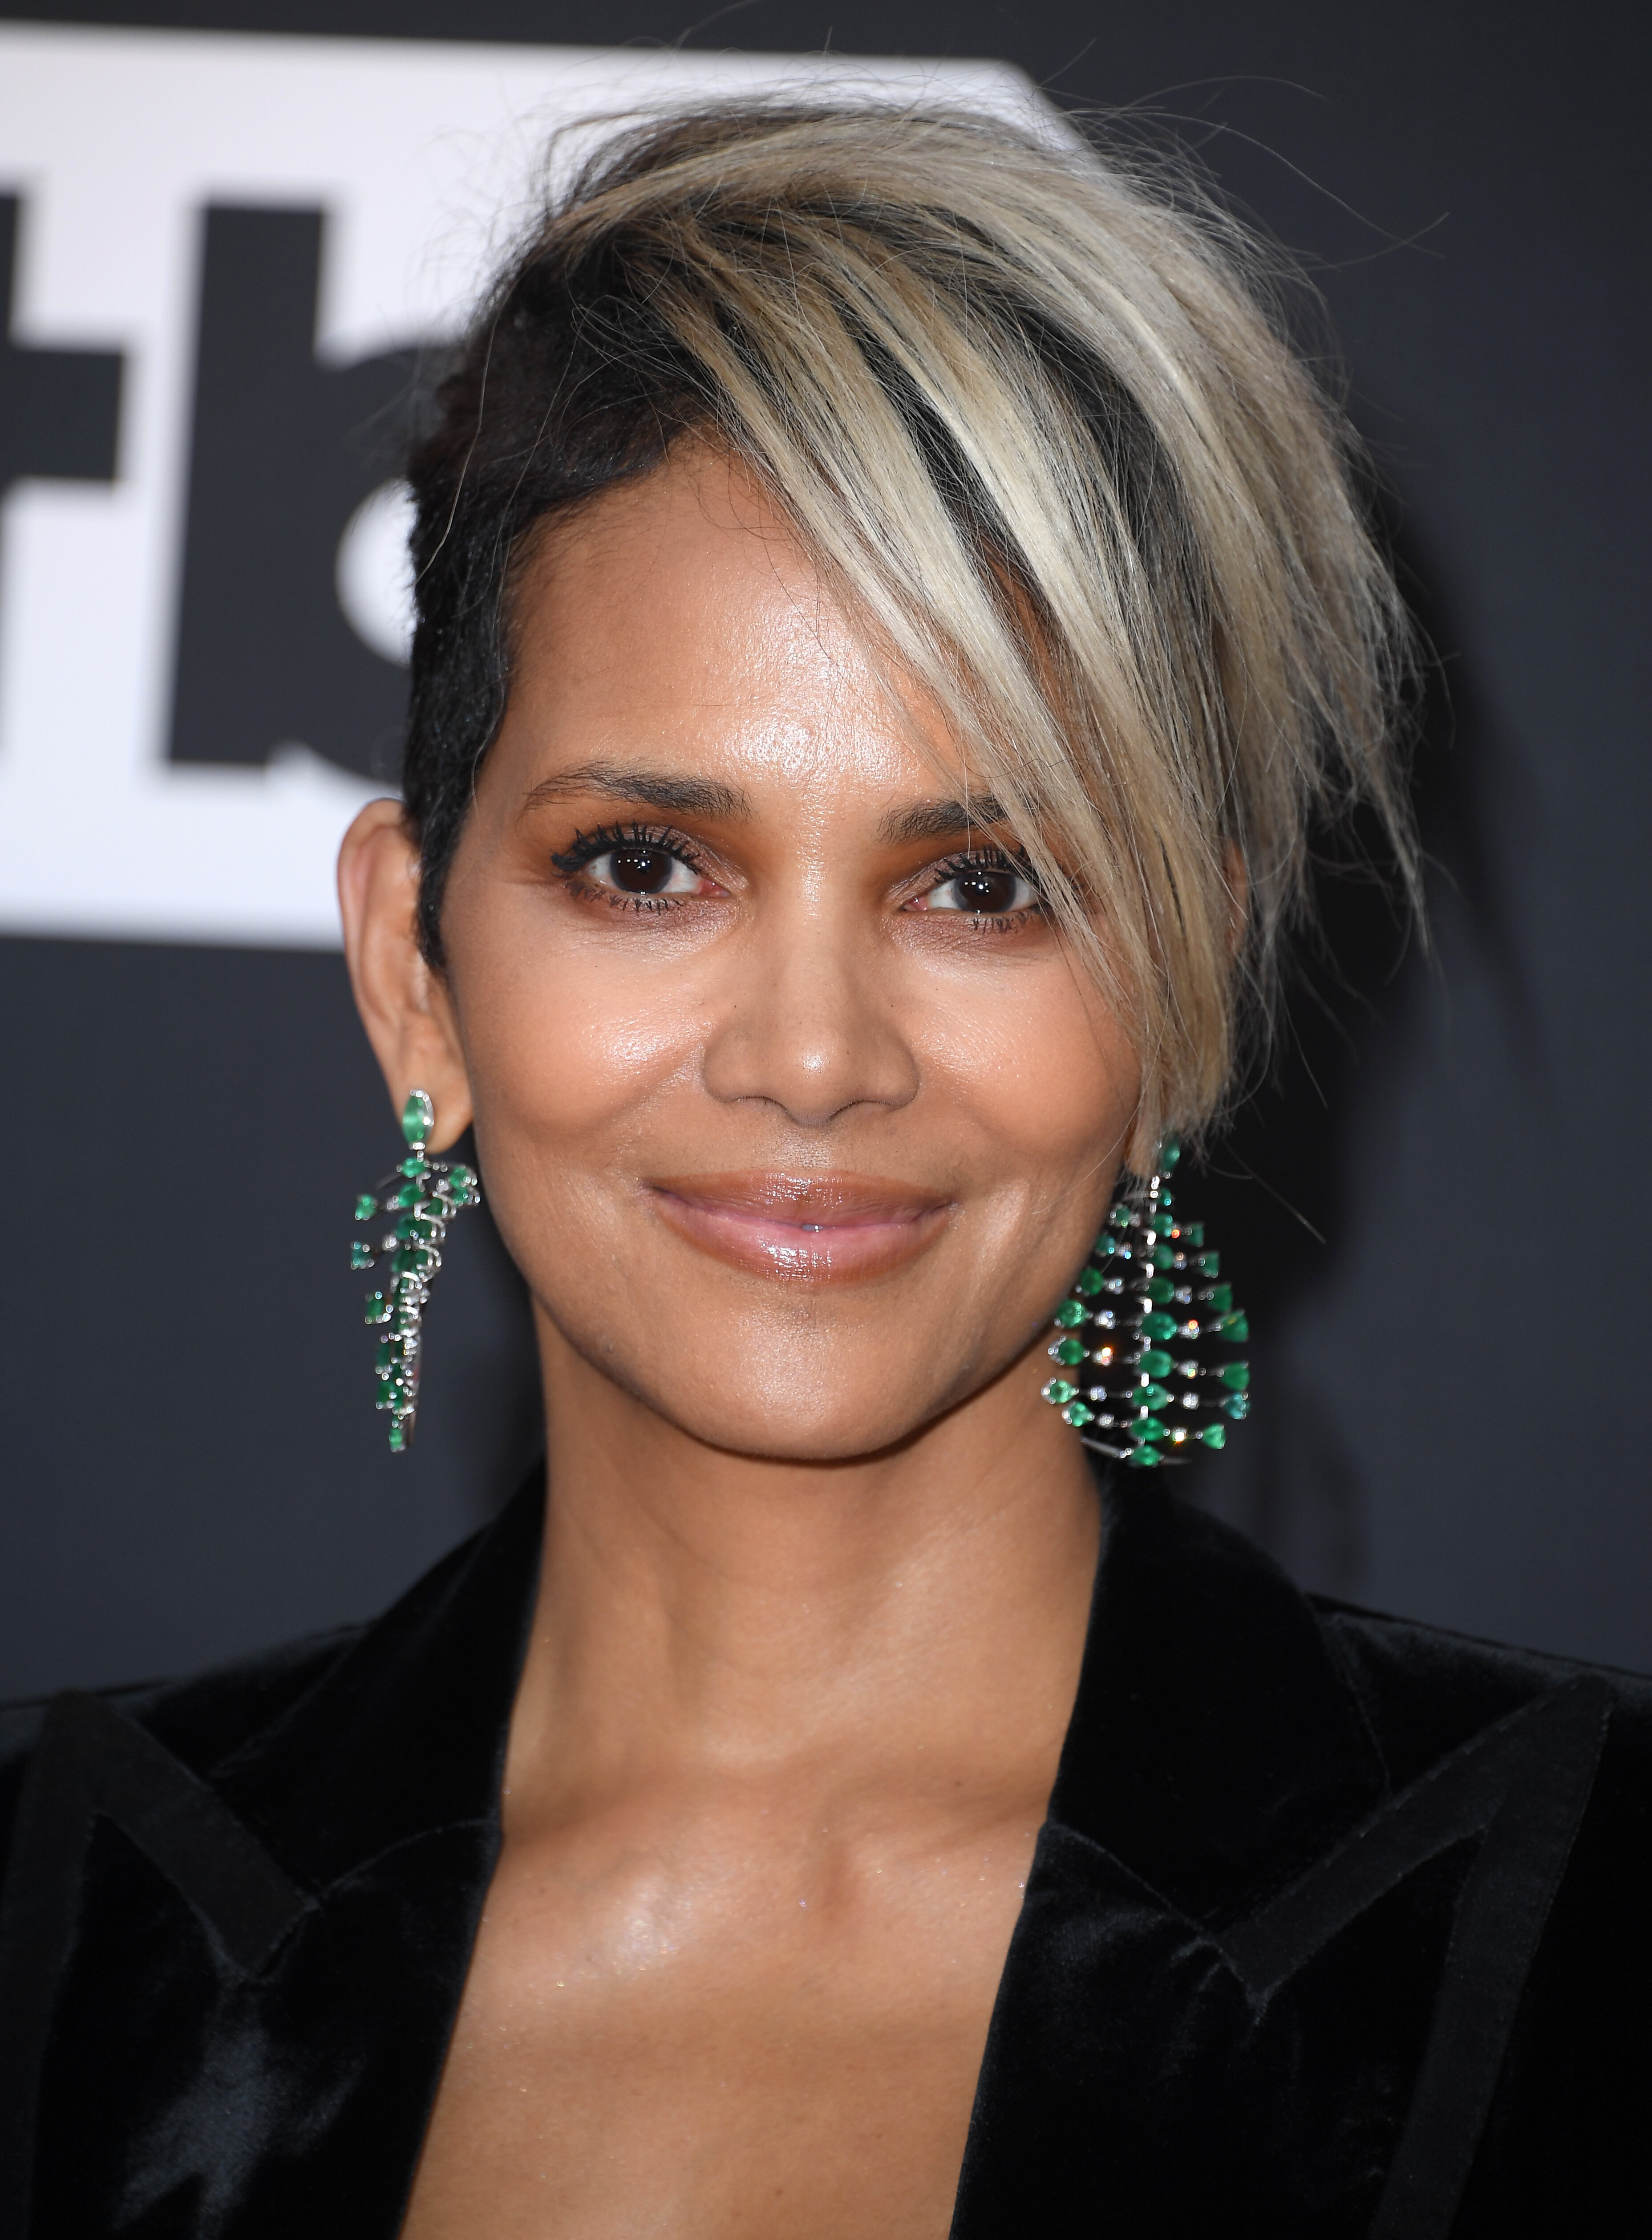 Halle Berry sporting a long straight hairstyle with movement